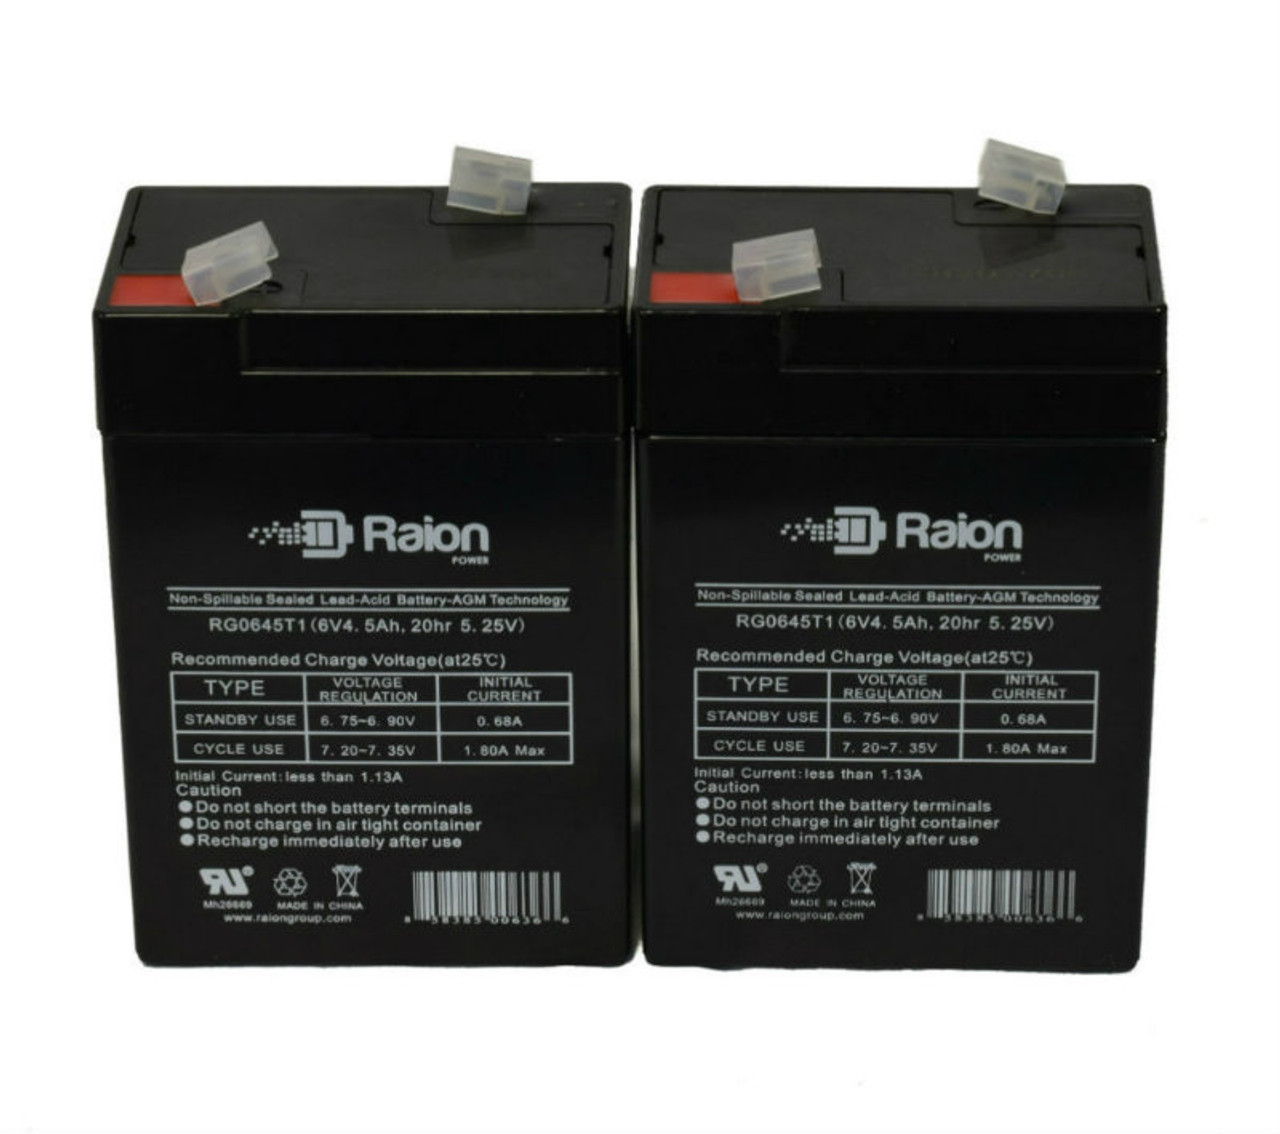 Raion Power 6V 4.5Ah Replacement Emergency Light Battery for Tork CYL1LA - 2 Pack